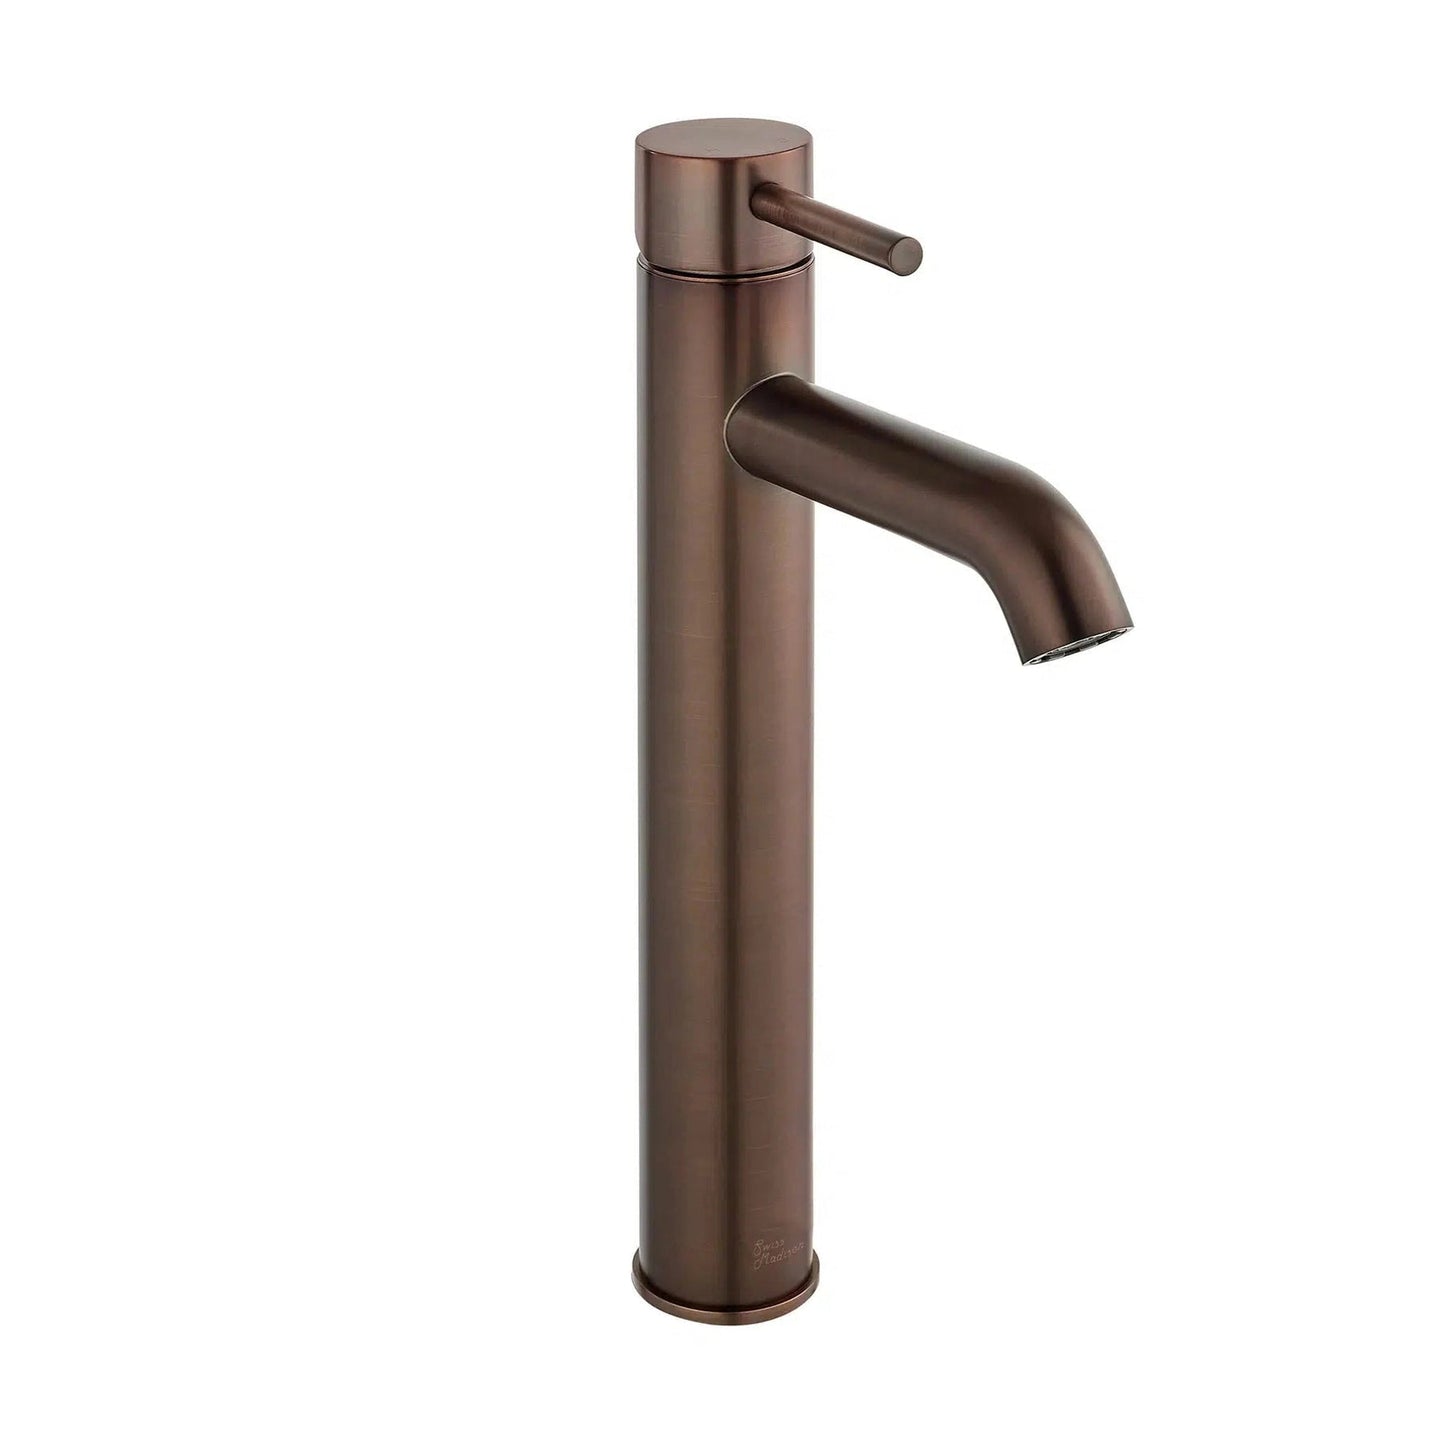 Swiss Madison Ivy 13" Single-Handle Oil Rubbed Bronze Bathroom Faucet With 1.2 GPM Flow Rate